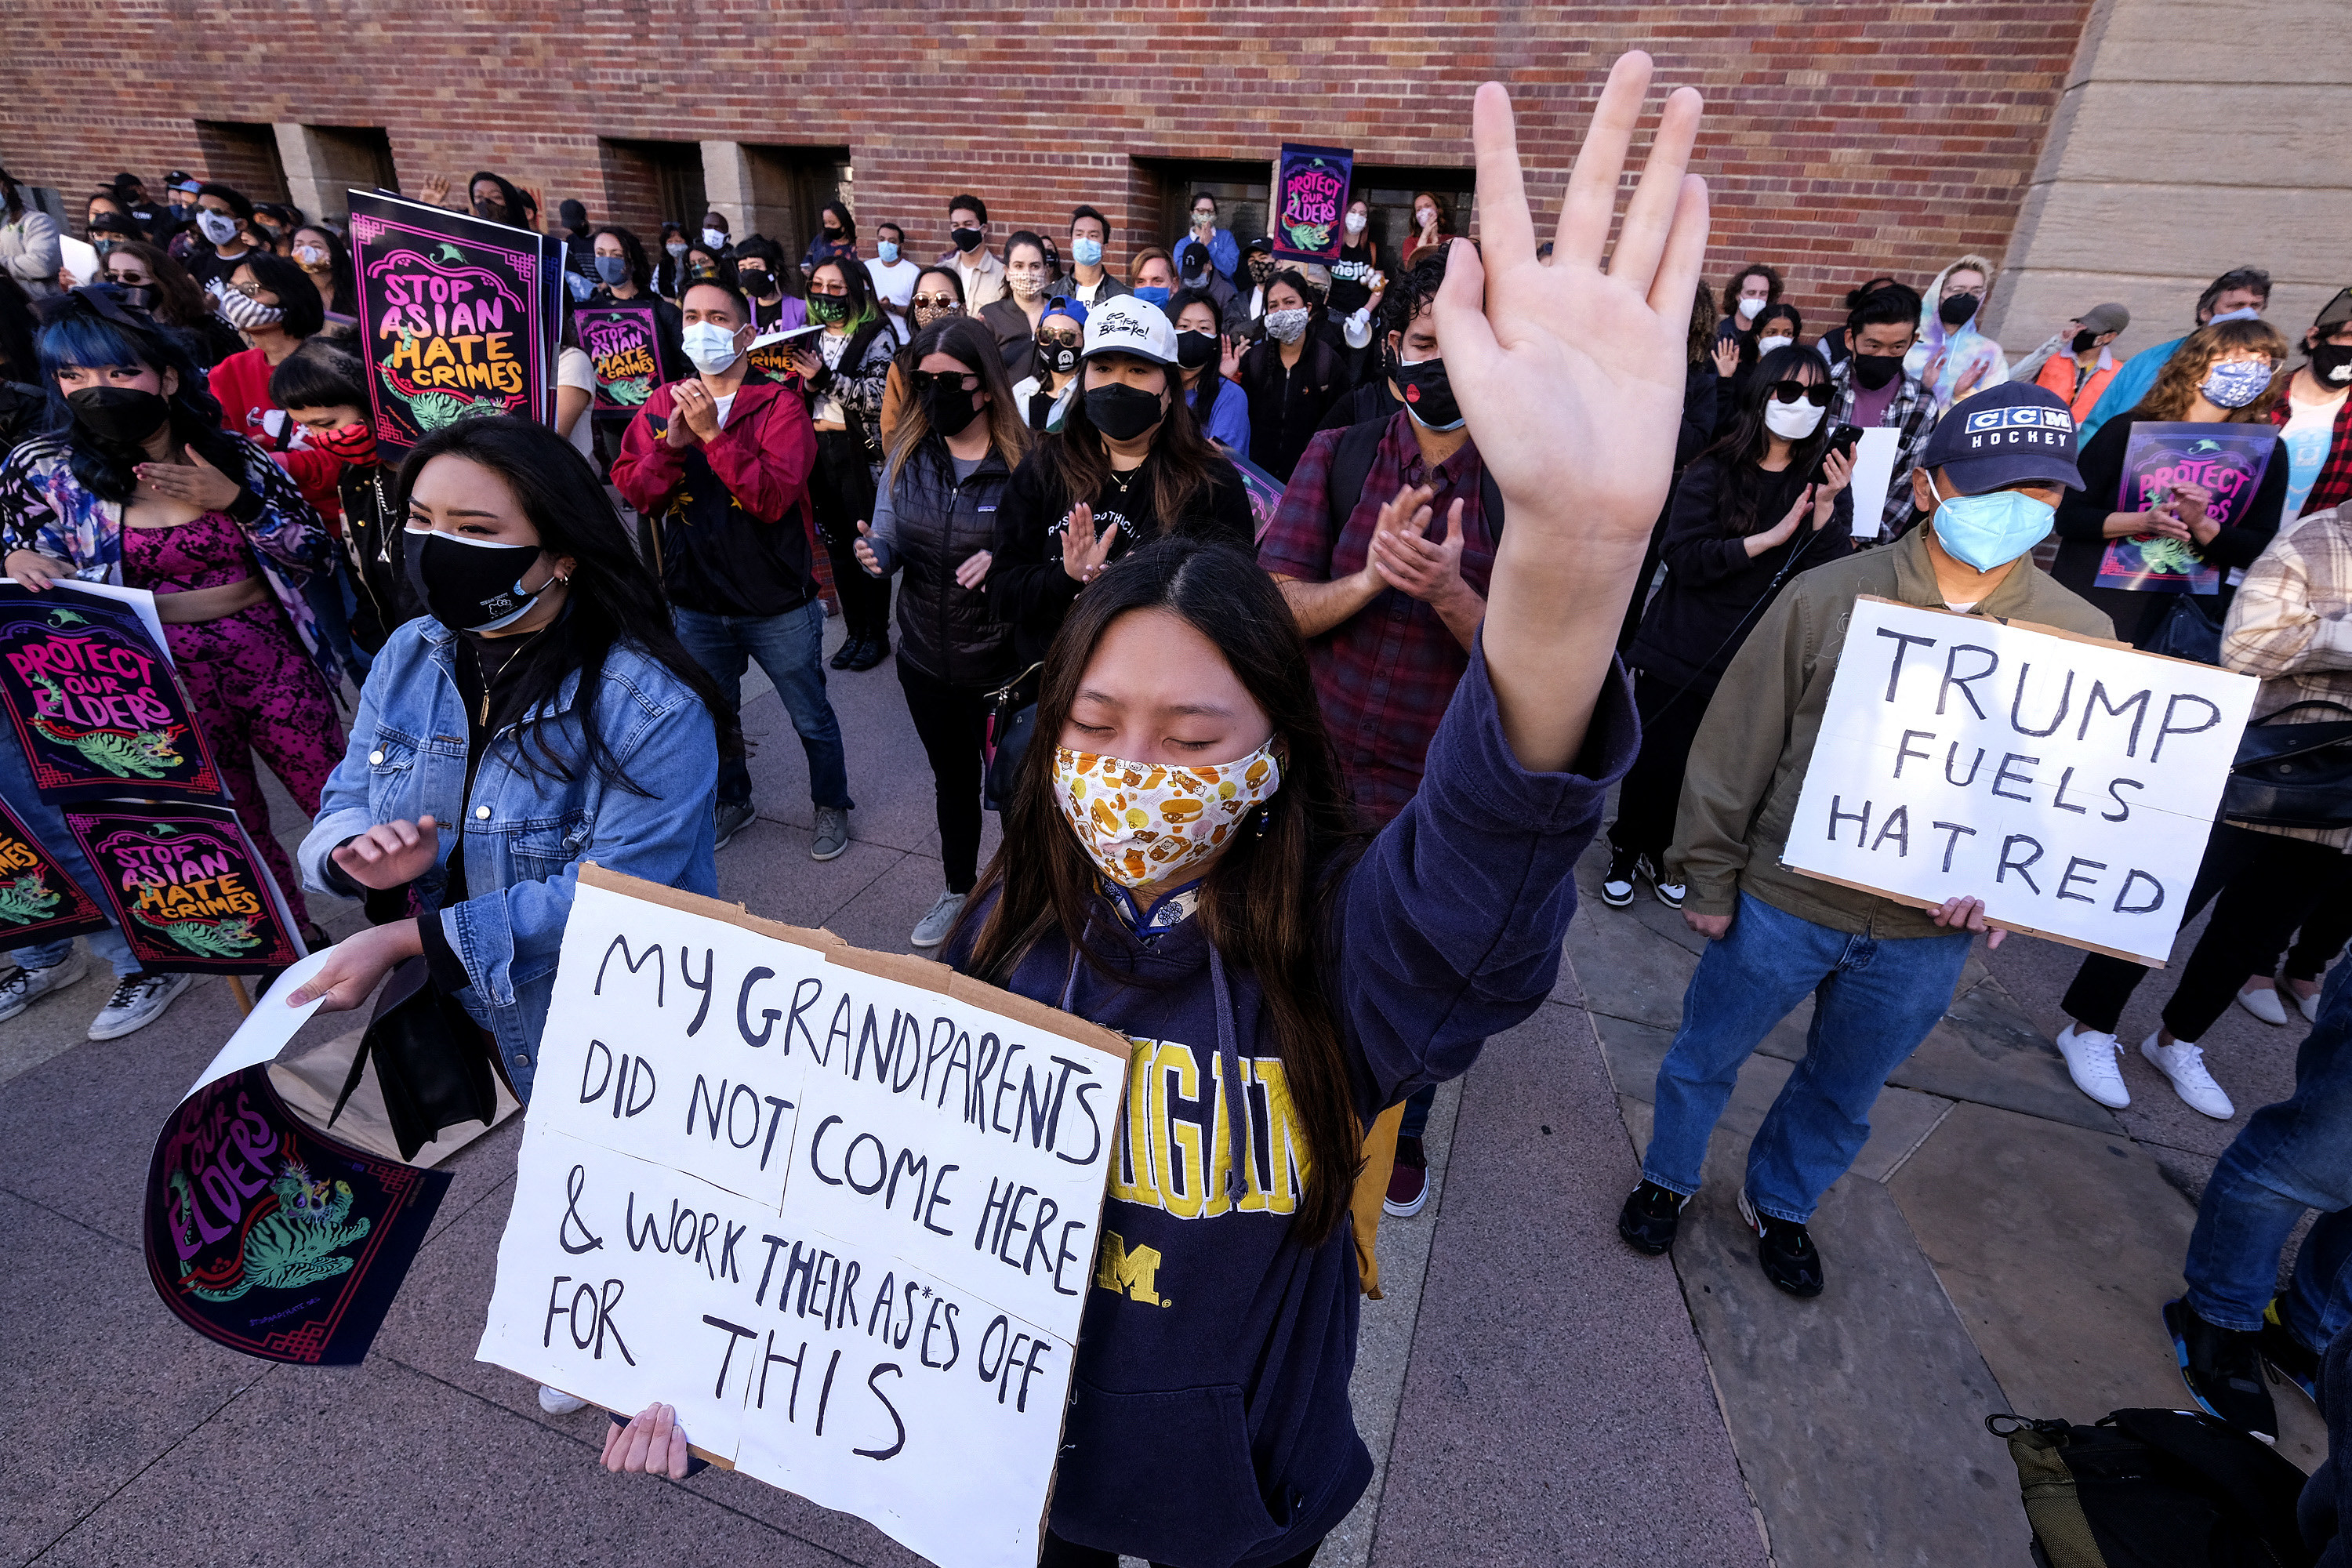 A woman holds a hand high in the air and carries a sign reading &quot;My grandparents did not come here and work their asses off for this&quot;